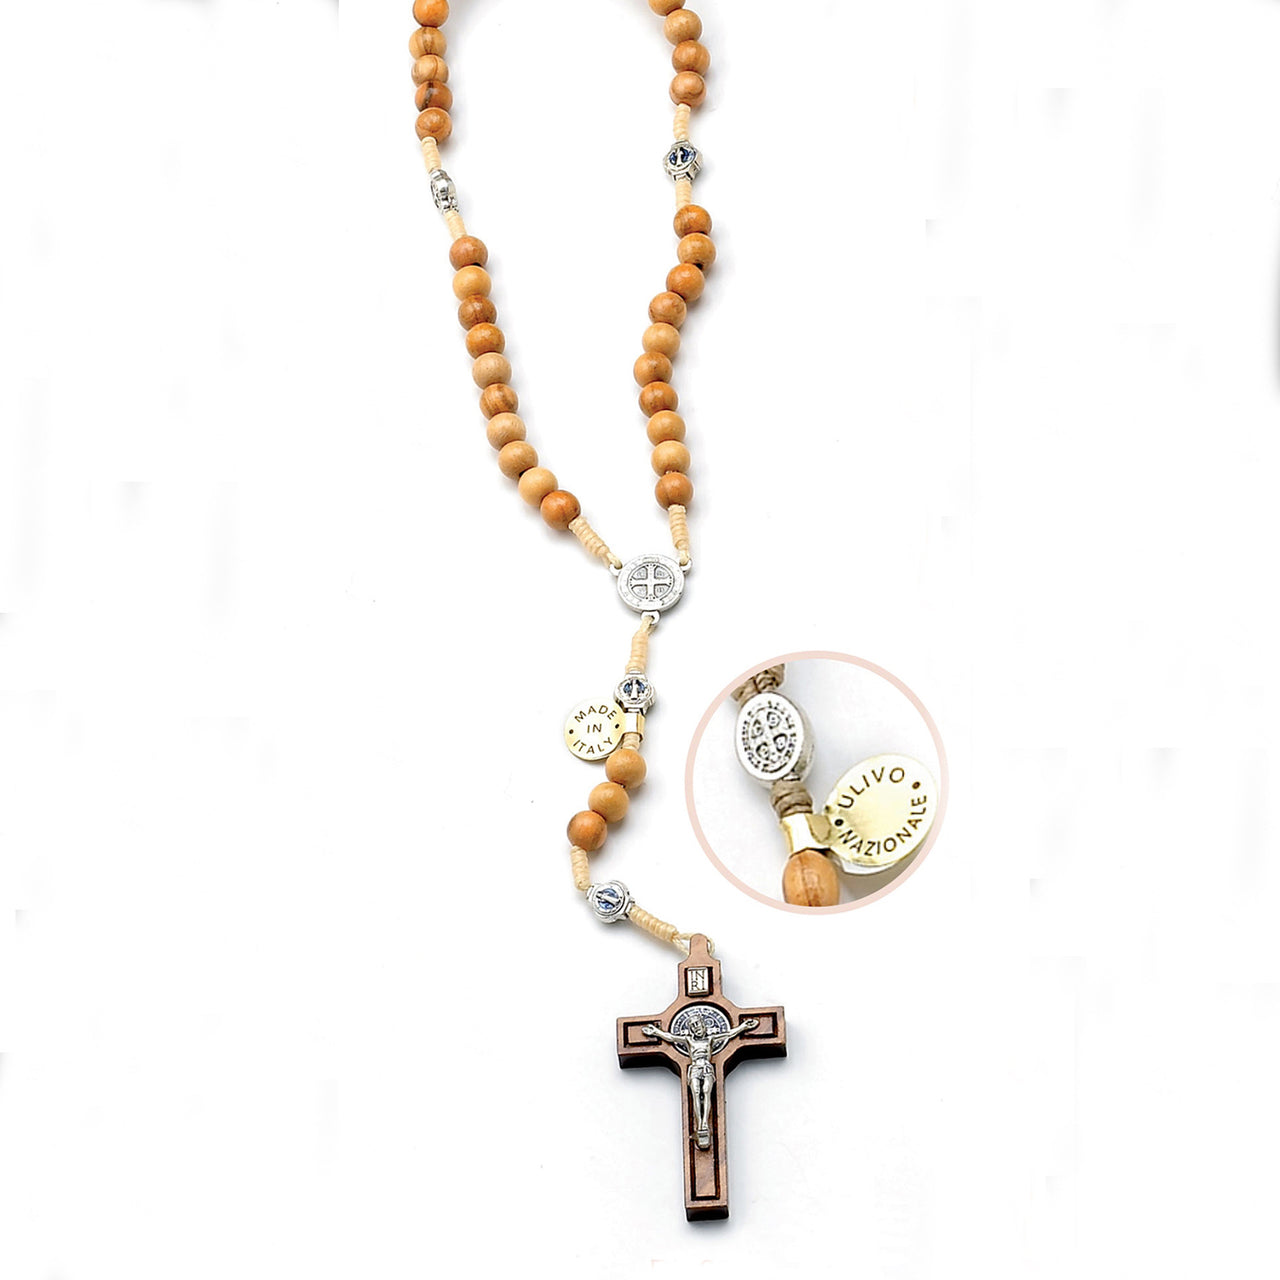 7mm Olive Wood St. Benedict Cord Rosary with Round Beads